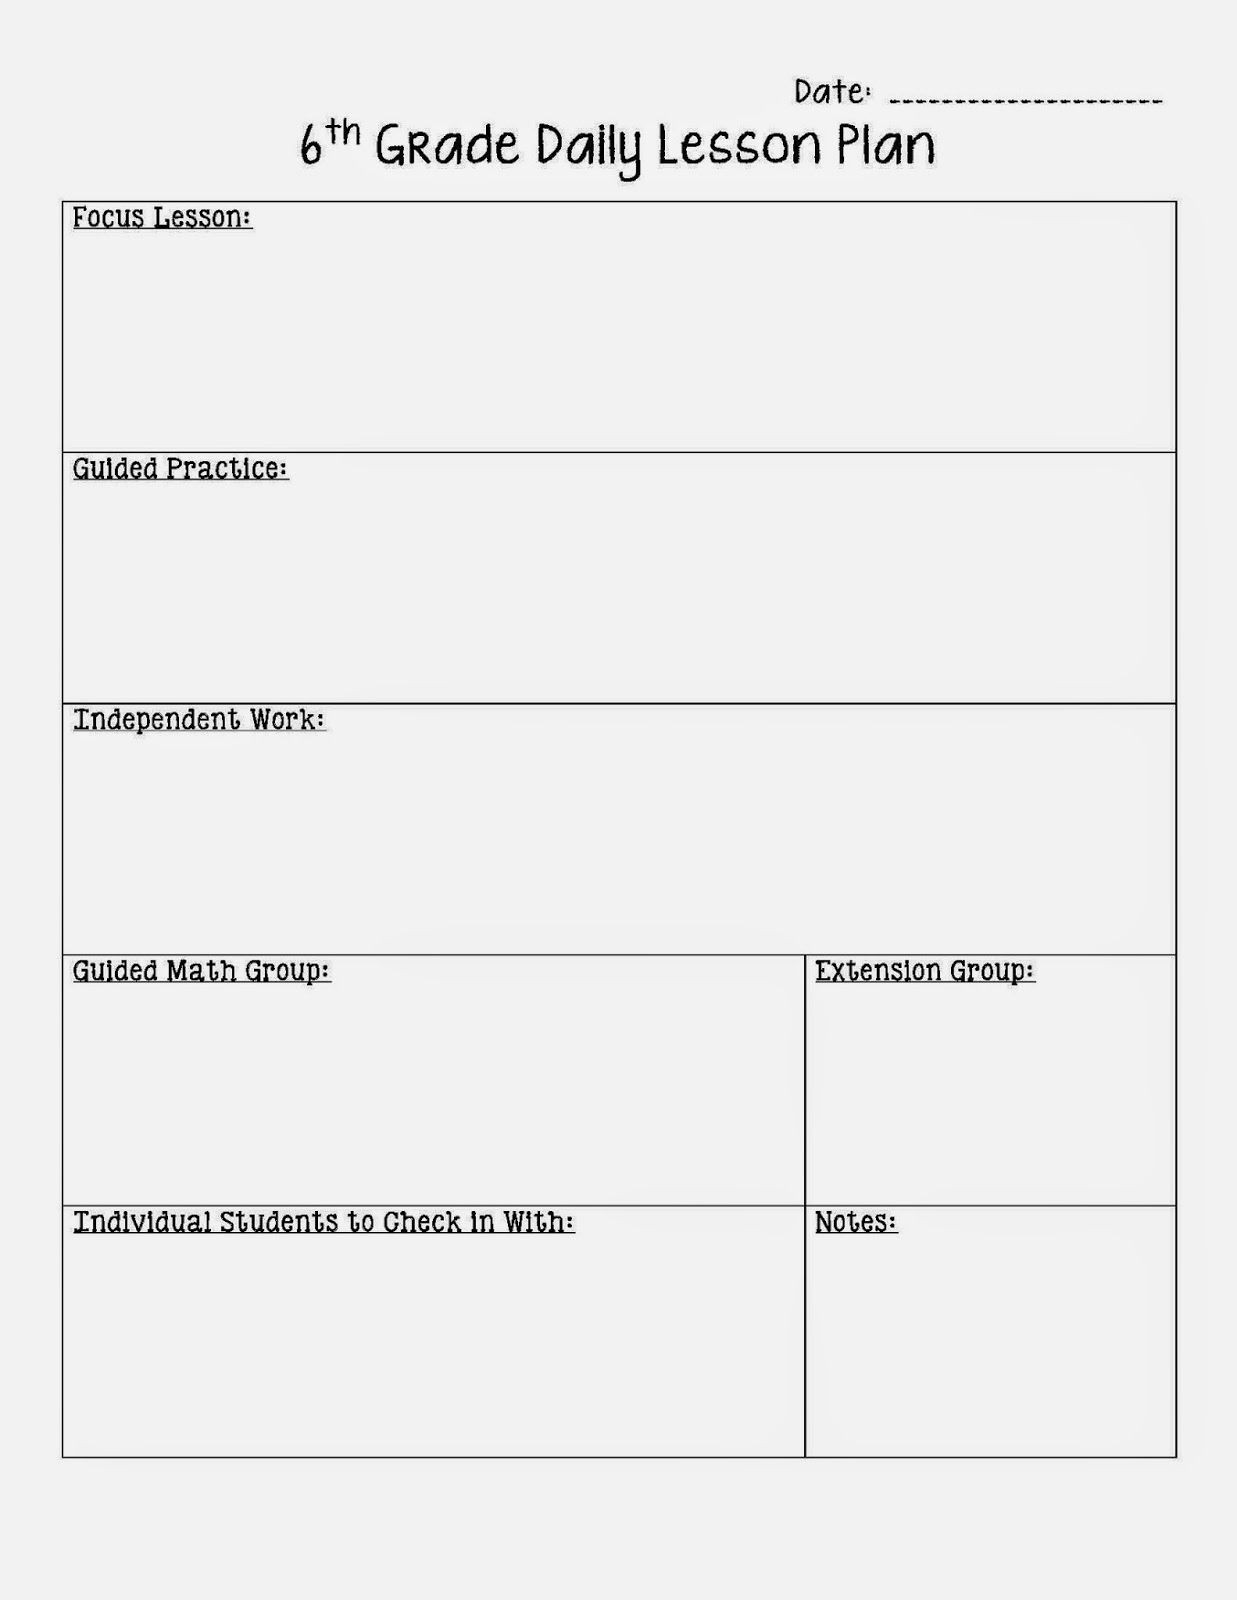 Middle School Math Lesson Plans Middle School Math Lesson Plan Template to Help Plan for